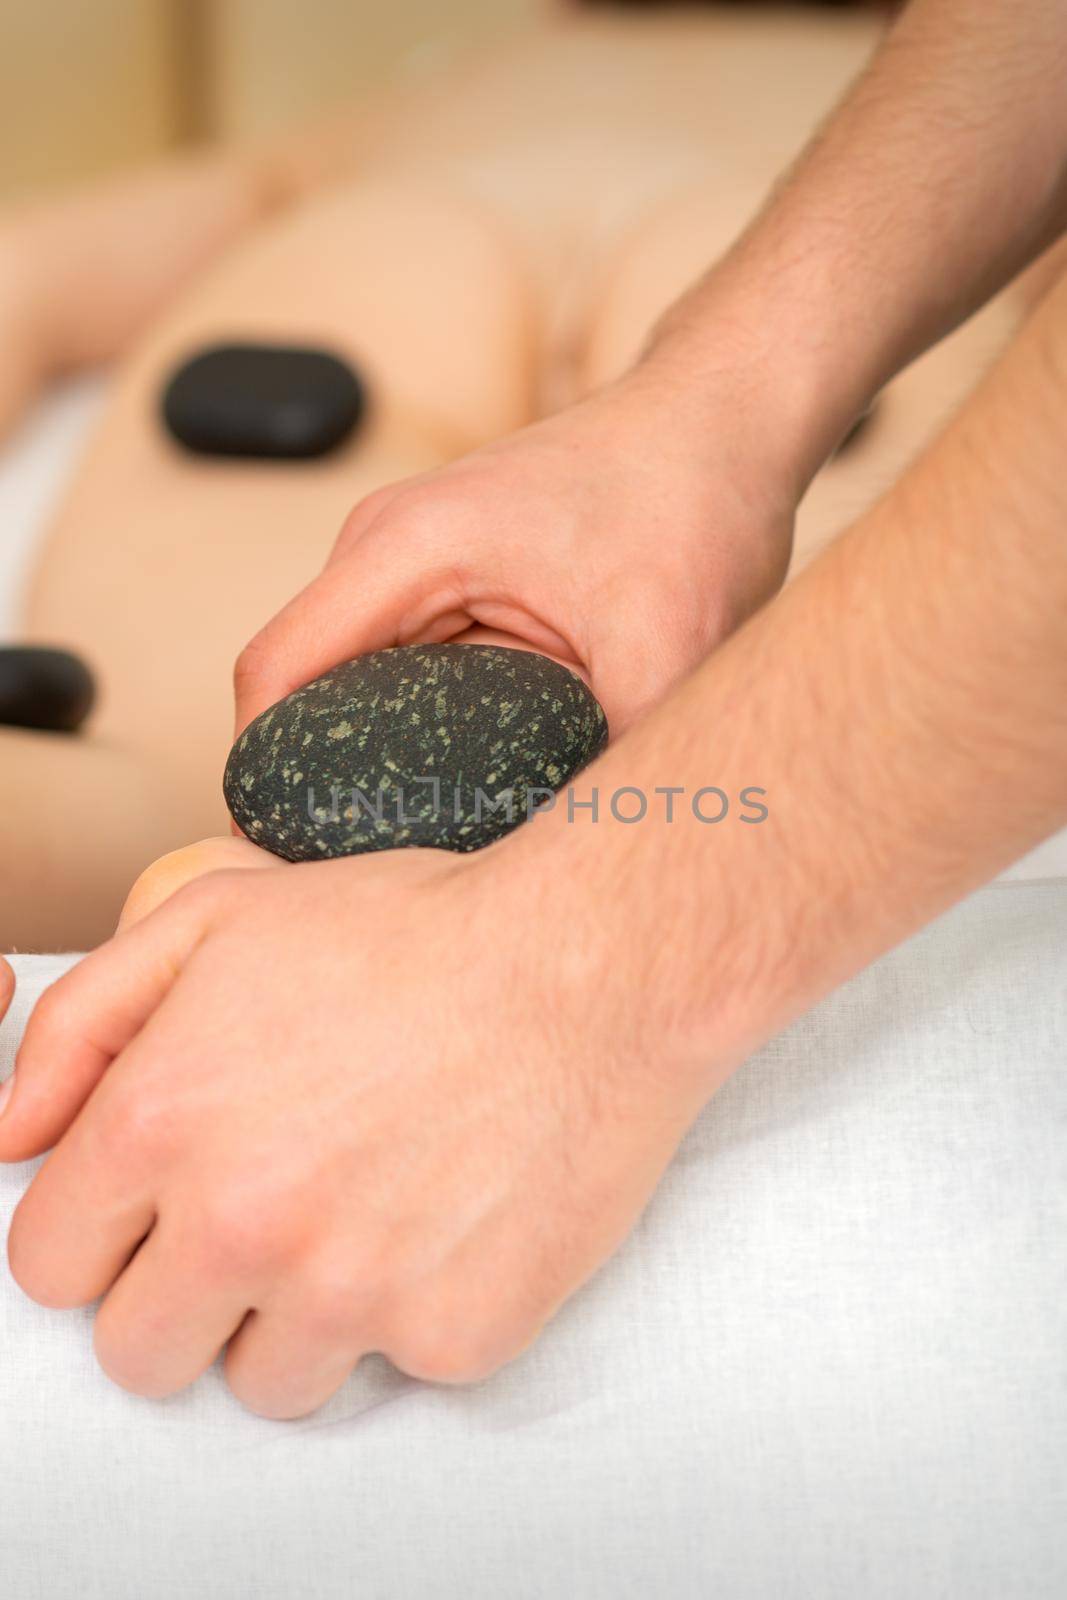 Two masseurs make a foot massage with a hot stone in four hands at the spa